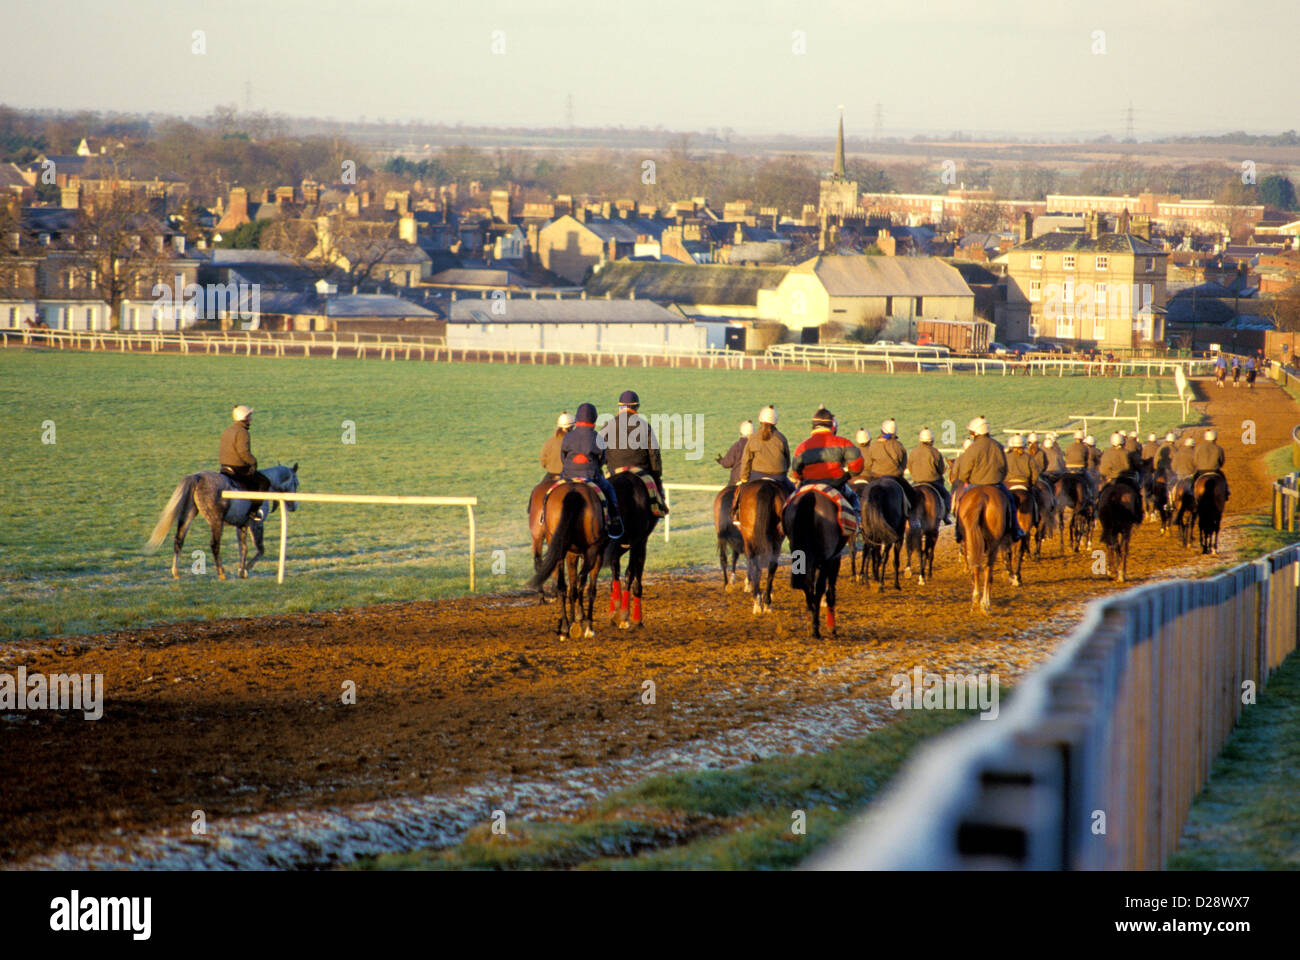 England. Newmarket. Horses At The Gallops. Stock Photo